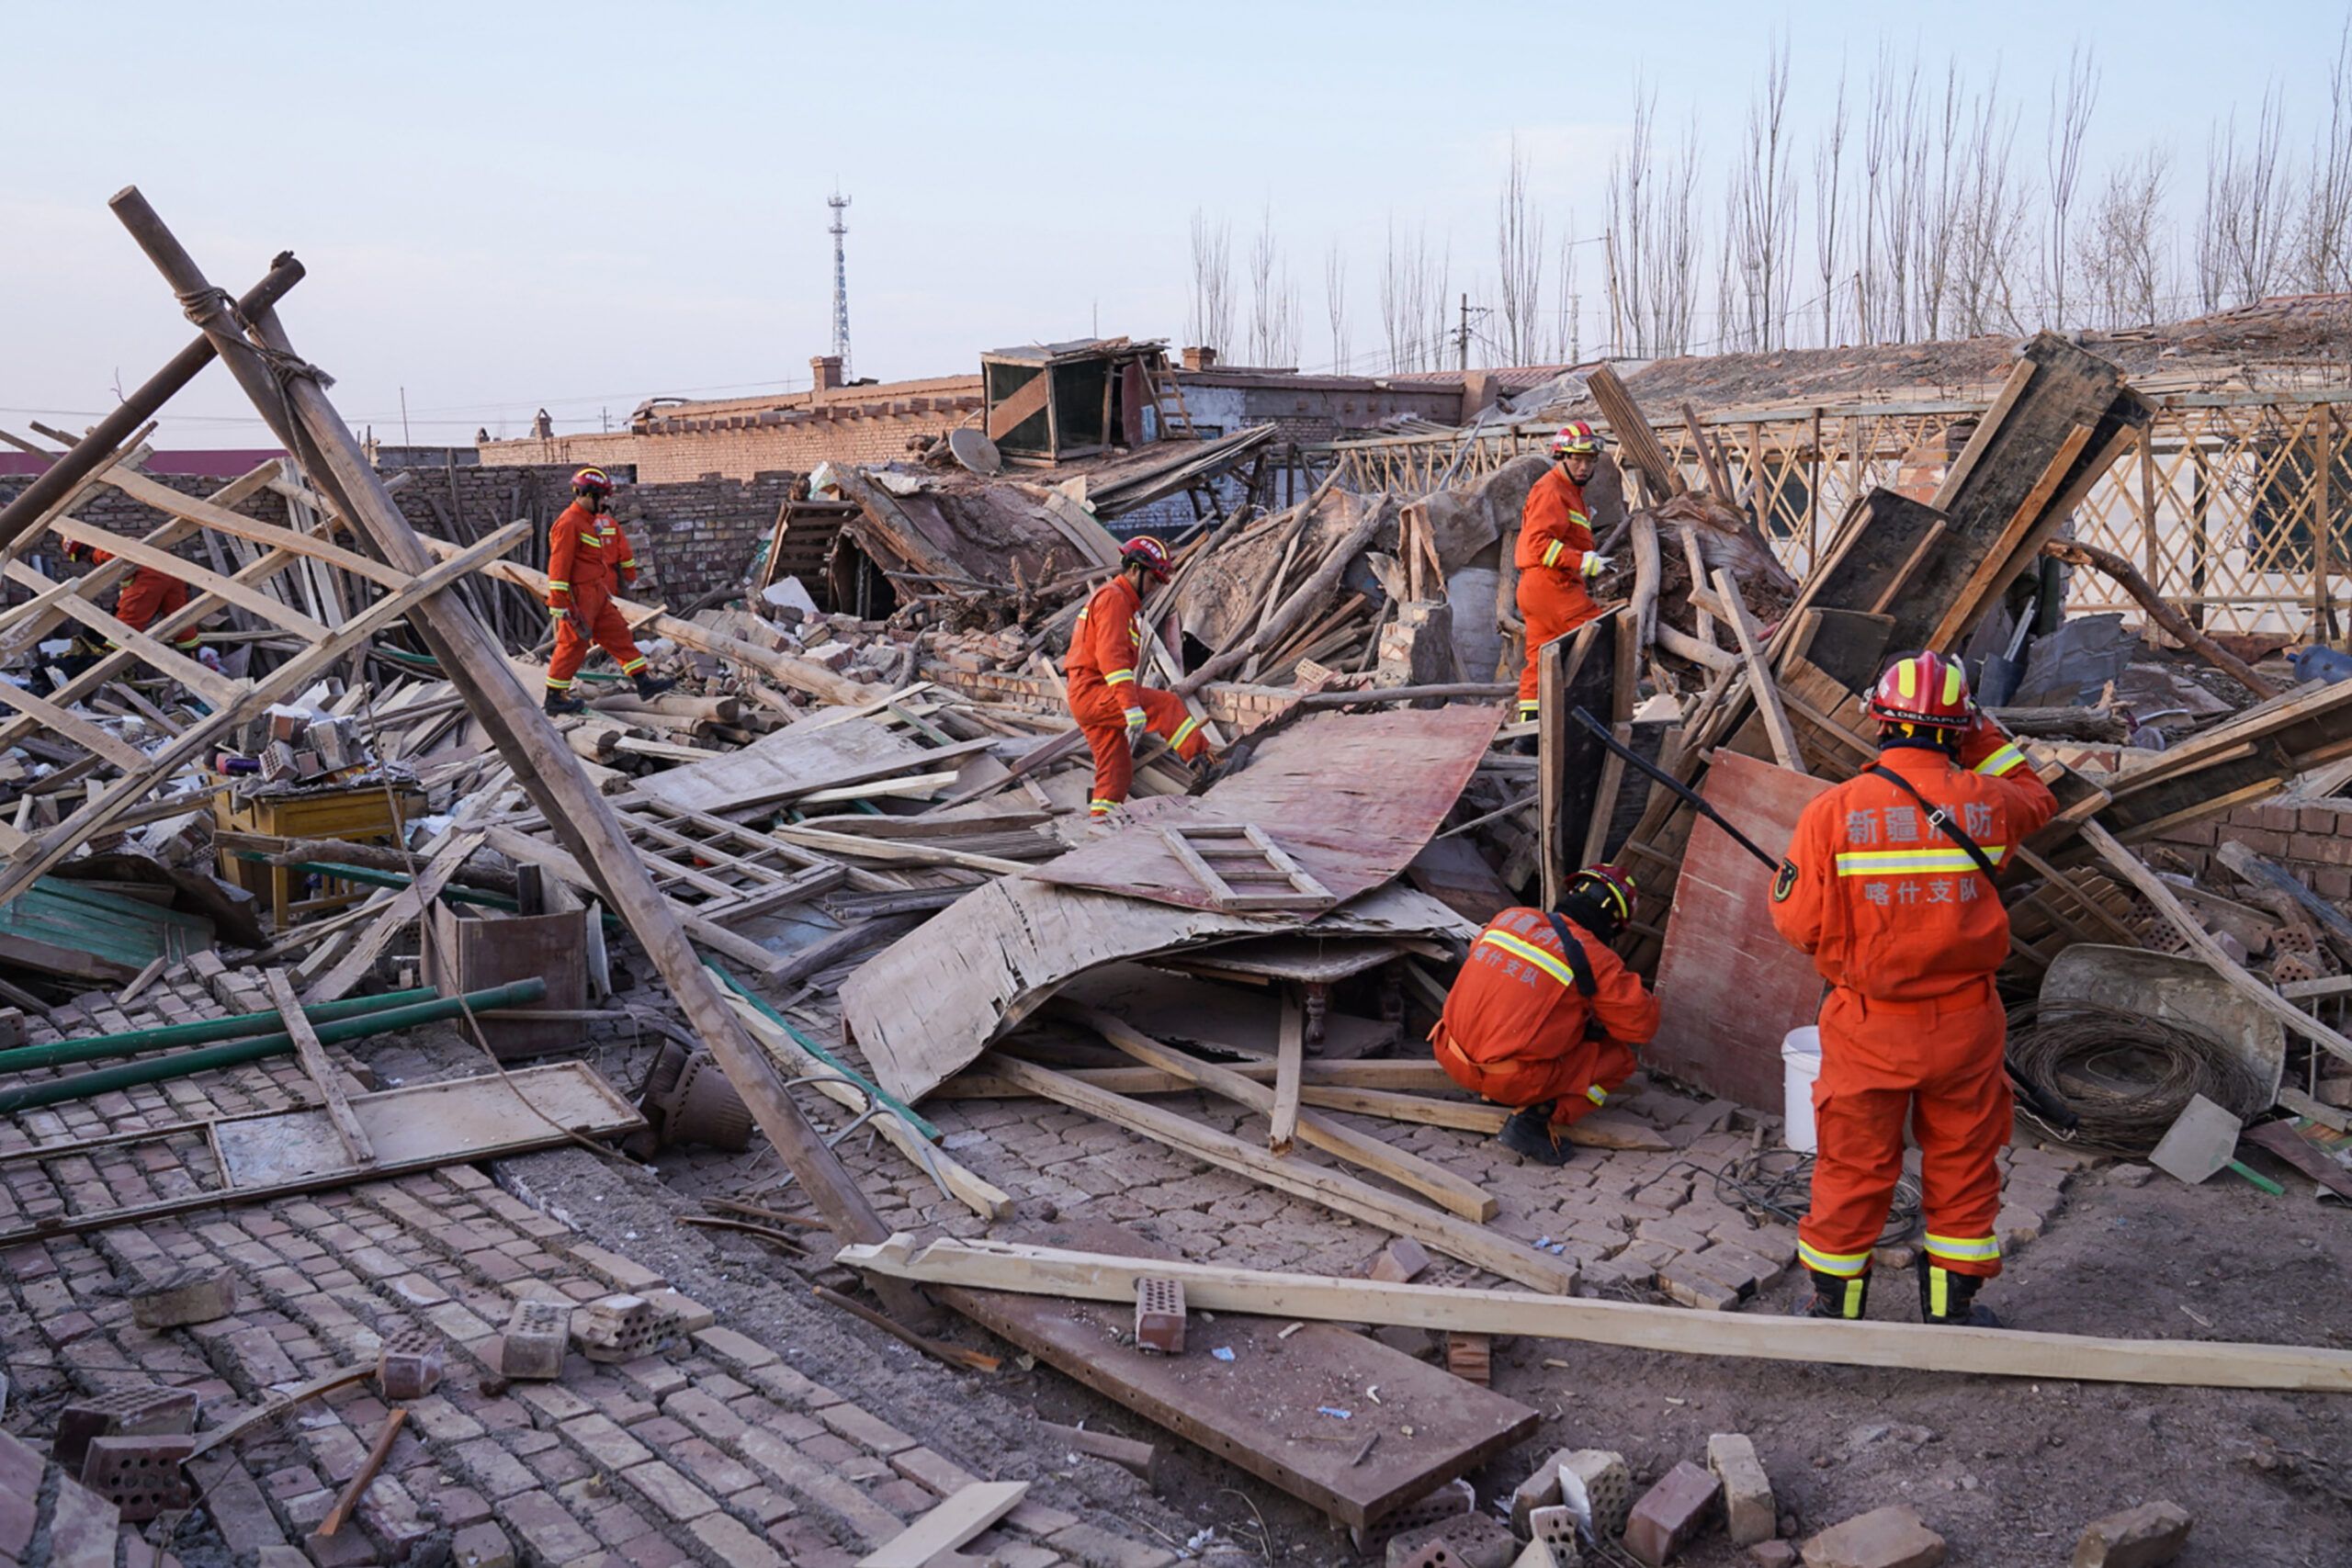 Rescuers search in the aftermath of an earthquake in Kashgar in China's northwestern Xinjiang region on January 20, 2020. A 6.0 magnitude earthquake hit a remote area of northwest China's Xinjiang region late on January 19, the US Geological Survey said. (Photo by AFP) / China OUT